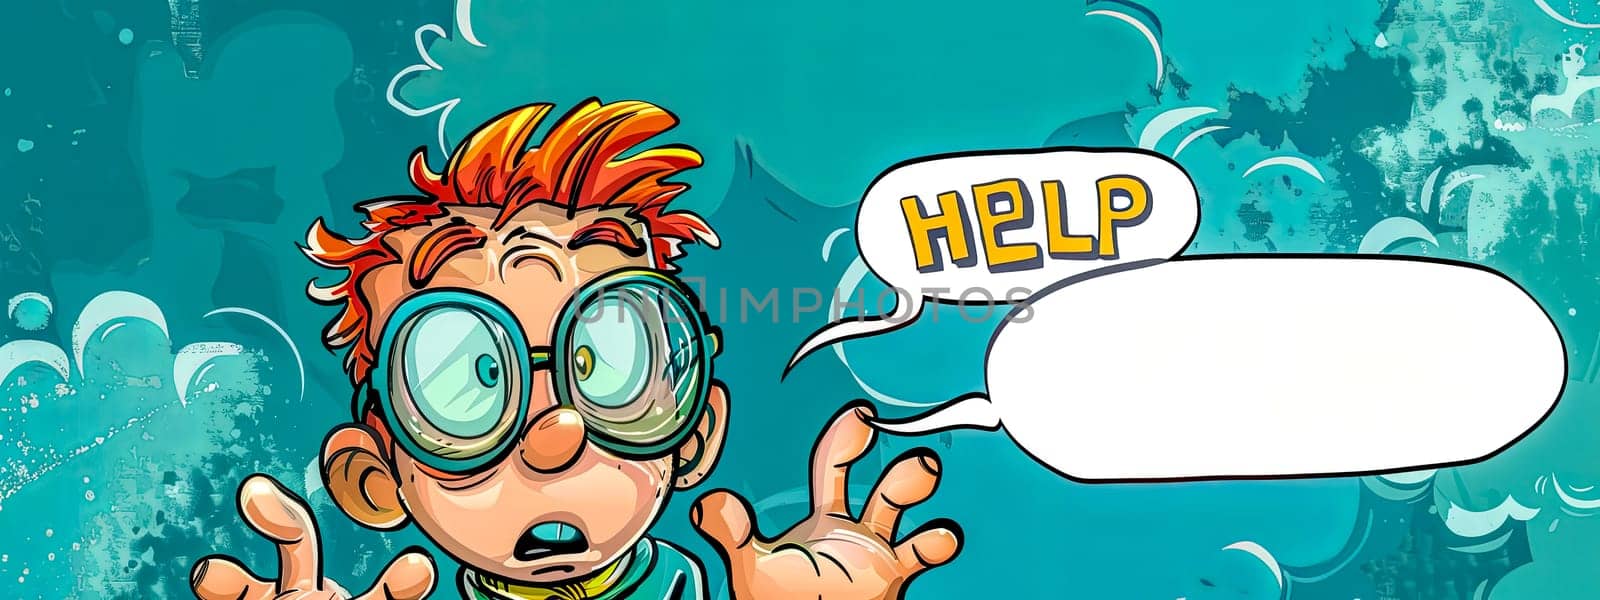 Wacky cartoon scientist character looks panicked, calling for help with empty speech bubble for your text